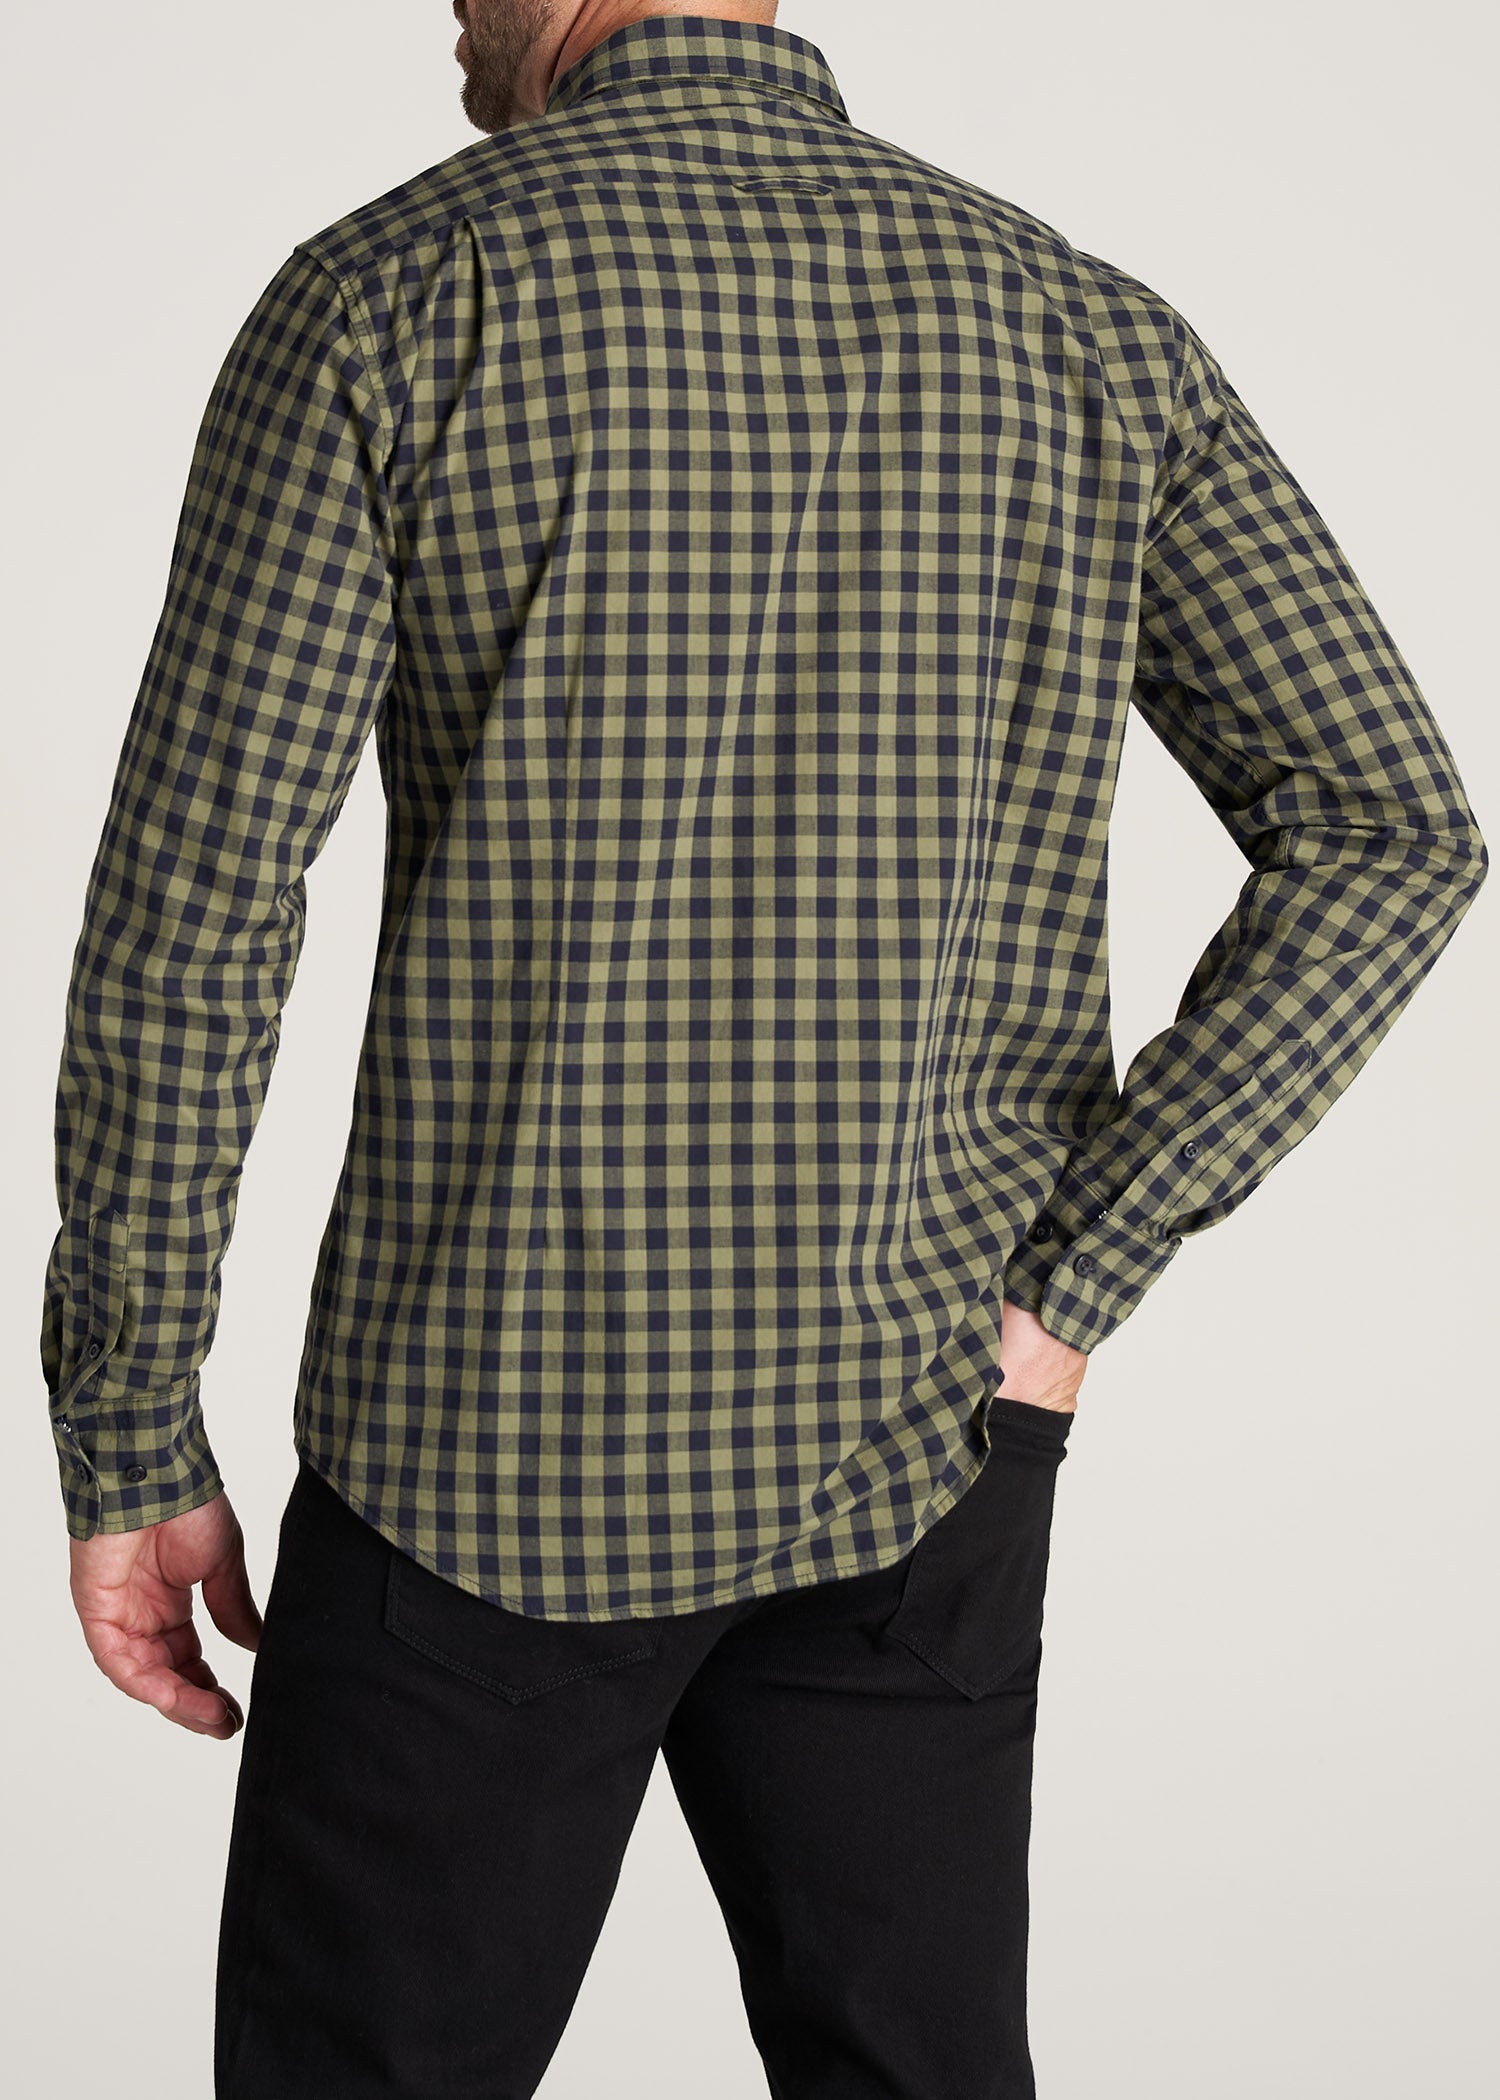    American-Tall-Men-SoftWash-Tall-ButtonUp-Shirt-MidnightBlue-Olive-back